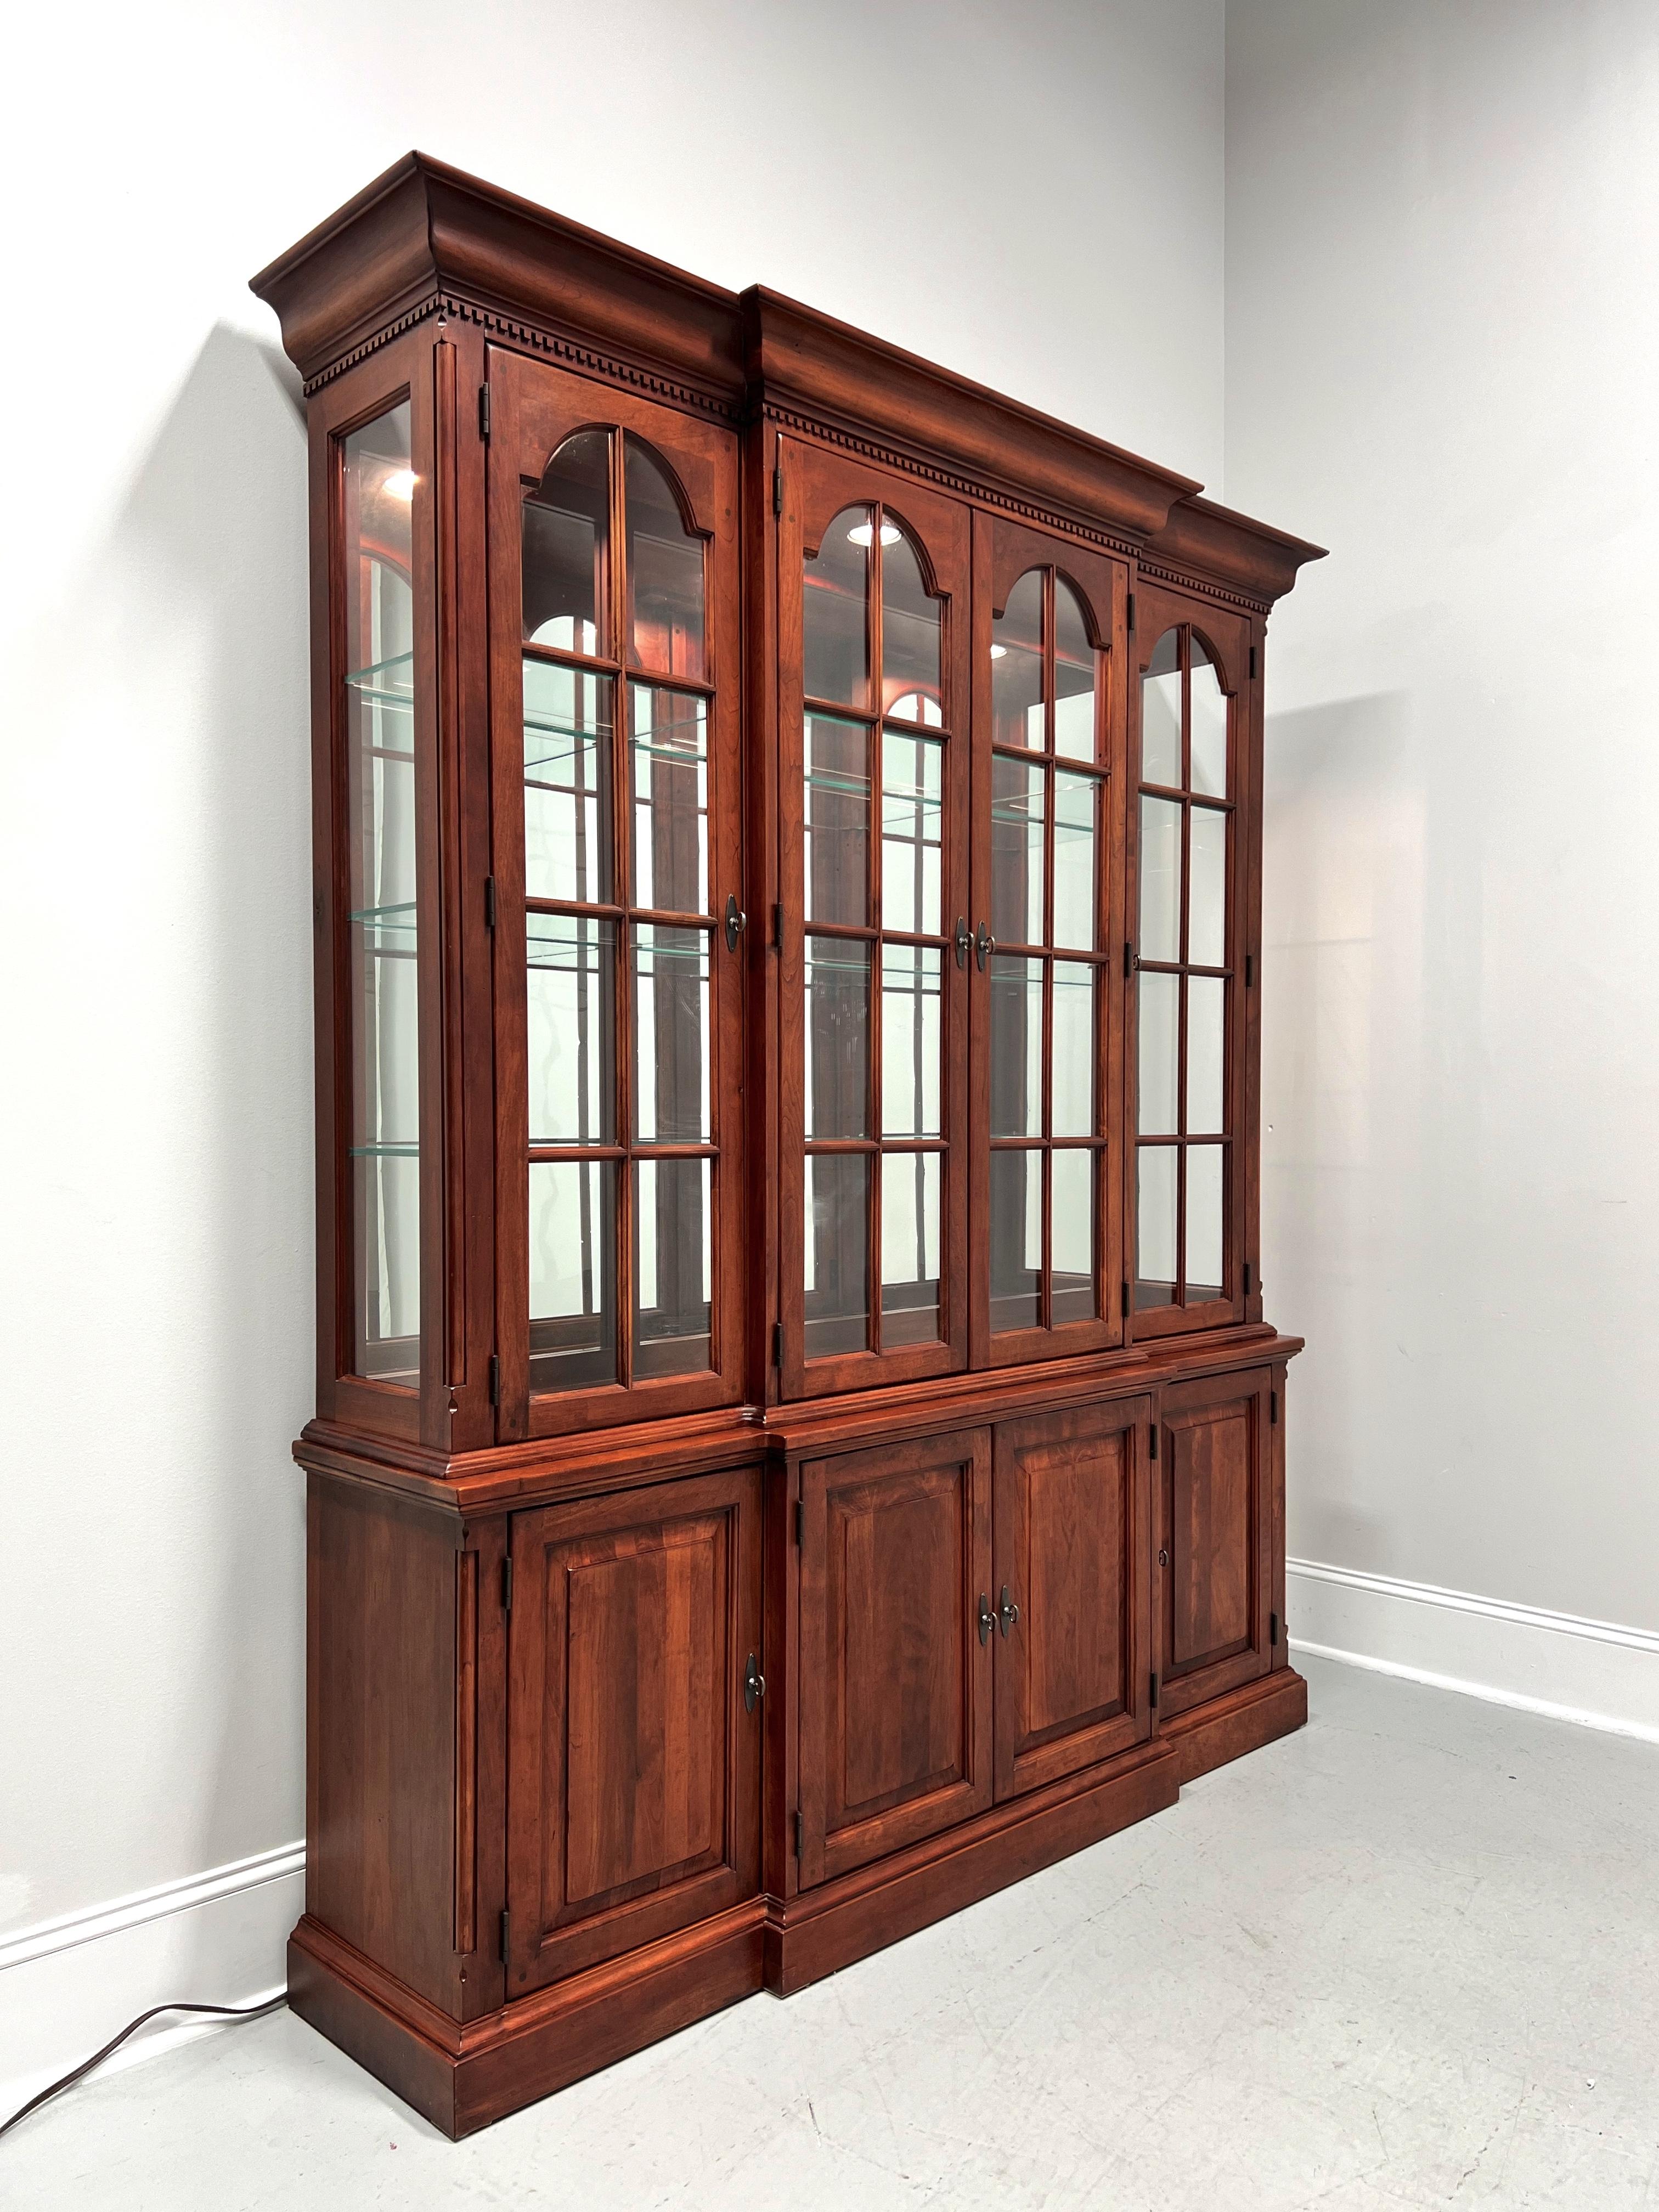 A Traditional style china cabinet by Lexington Furniture, the 